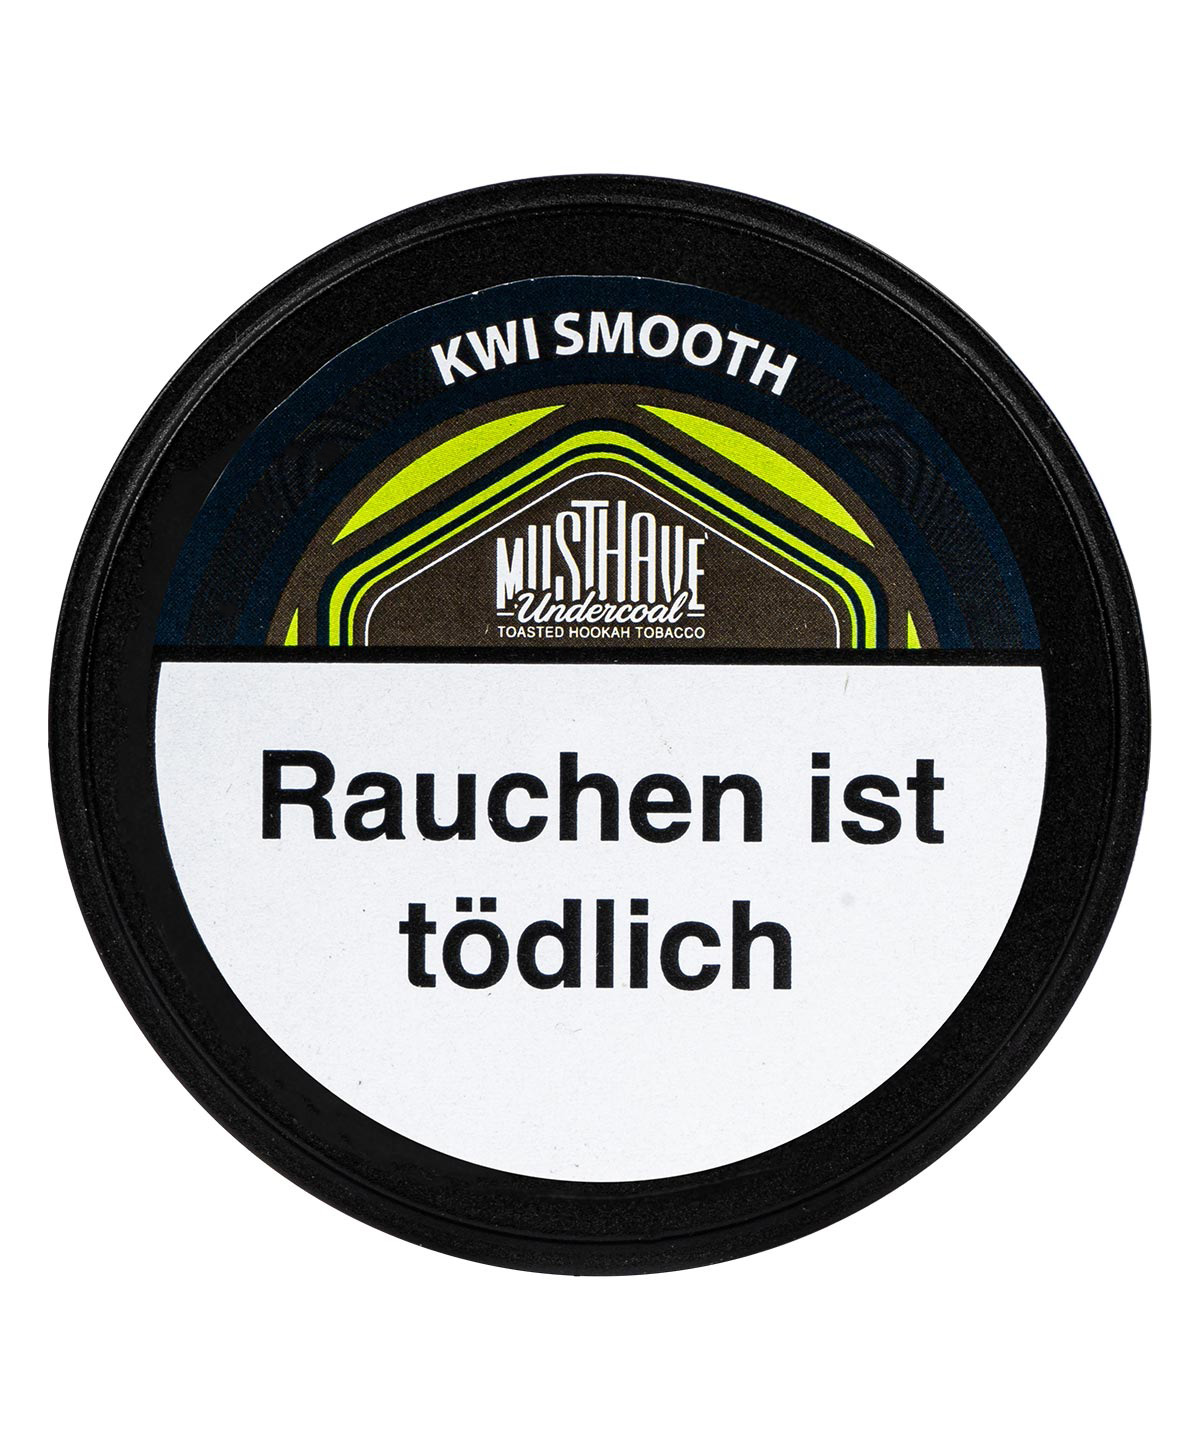 Musthave Kwi Smooth 250g